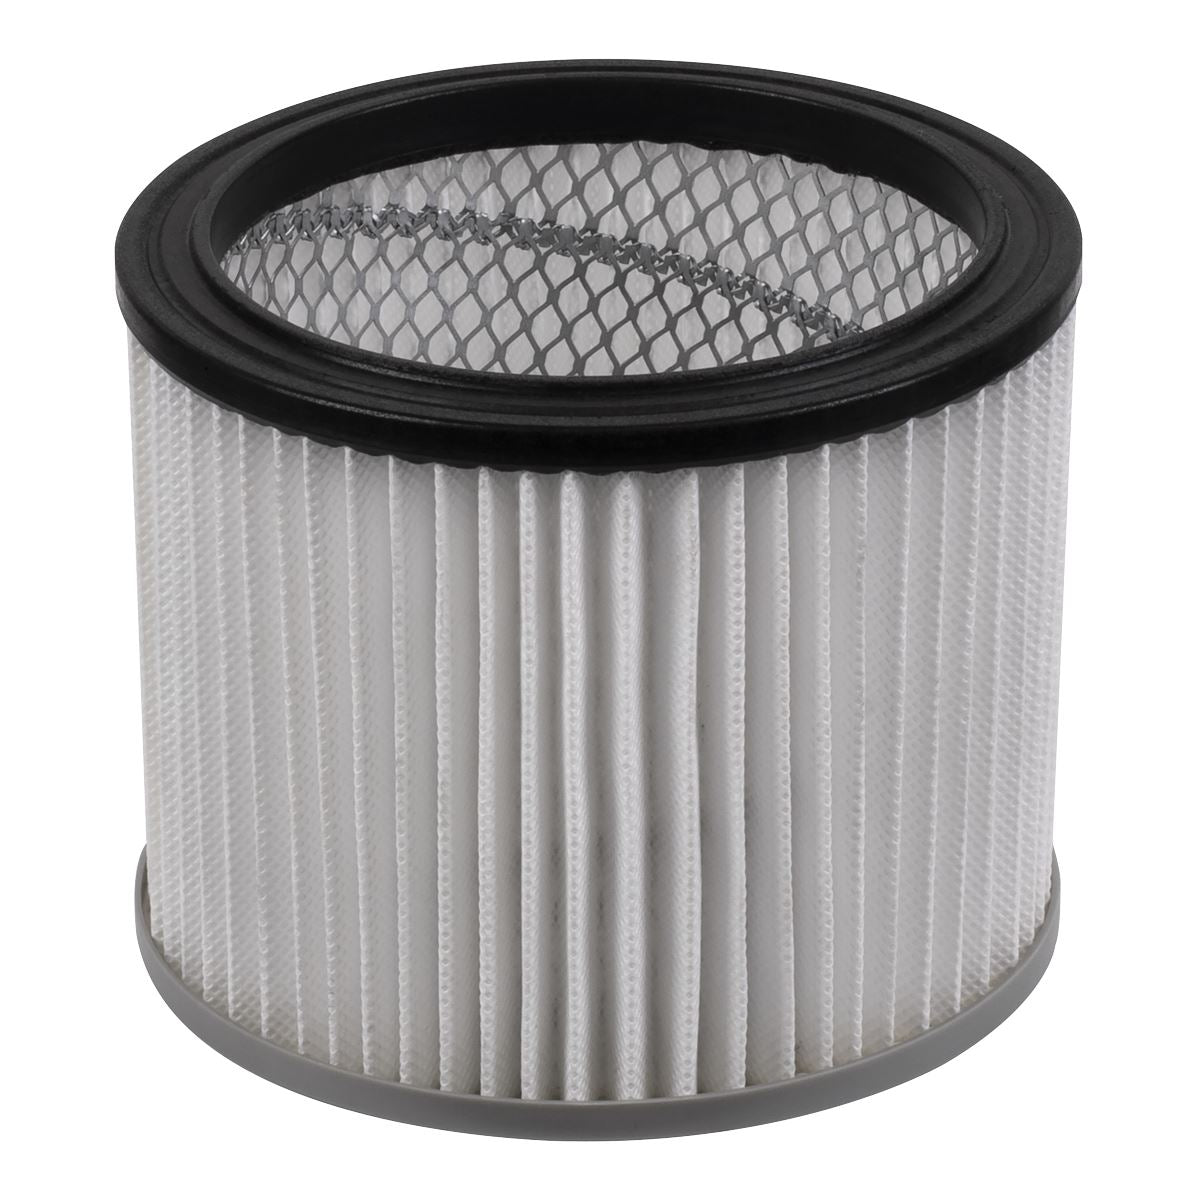 Sealey Cartridge Filter for PC20LN & PC30LN